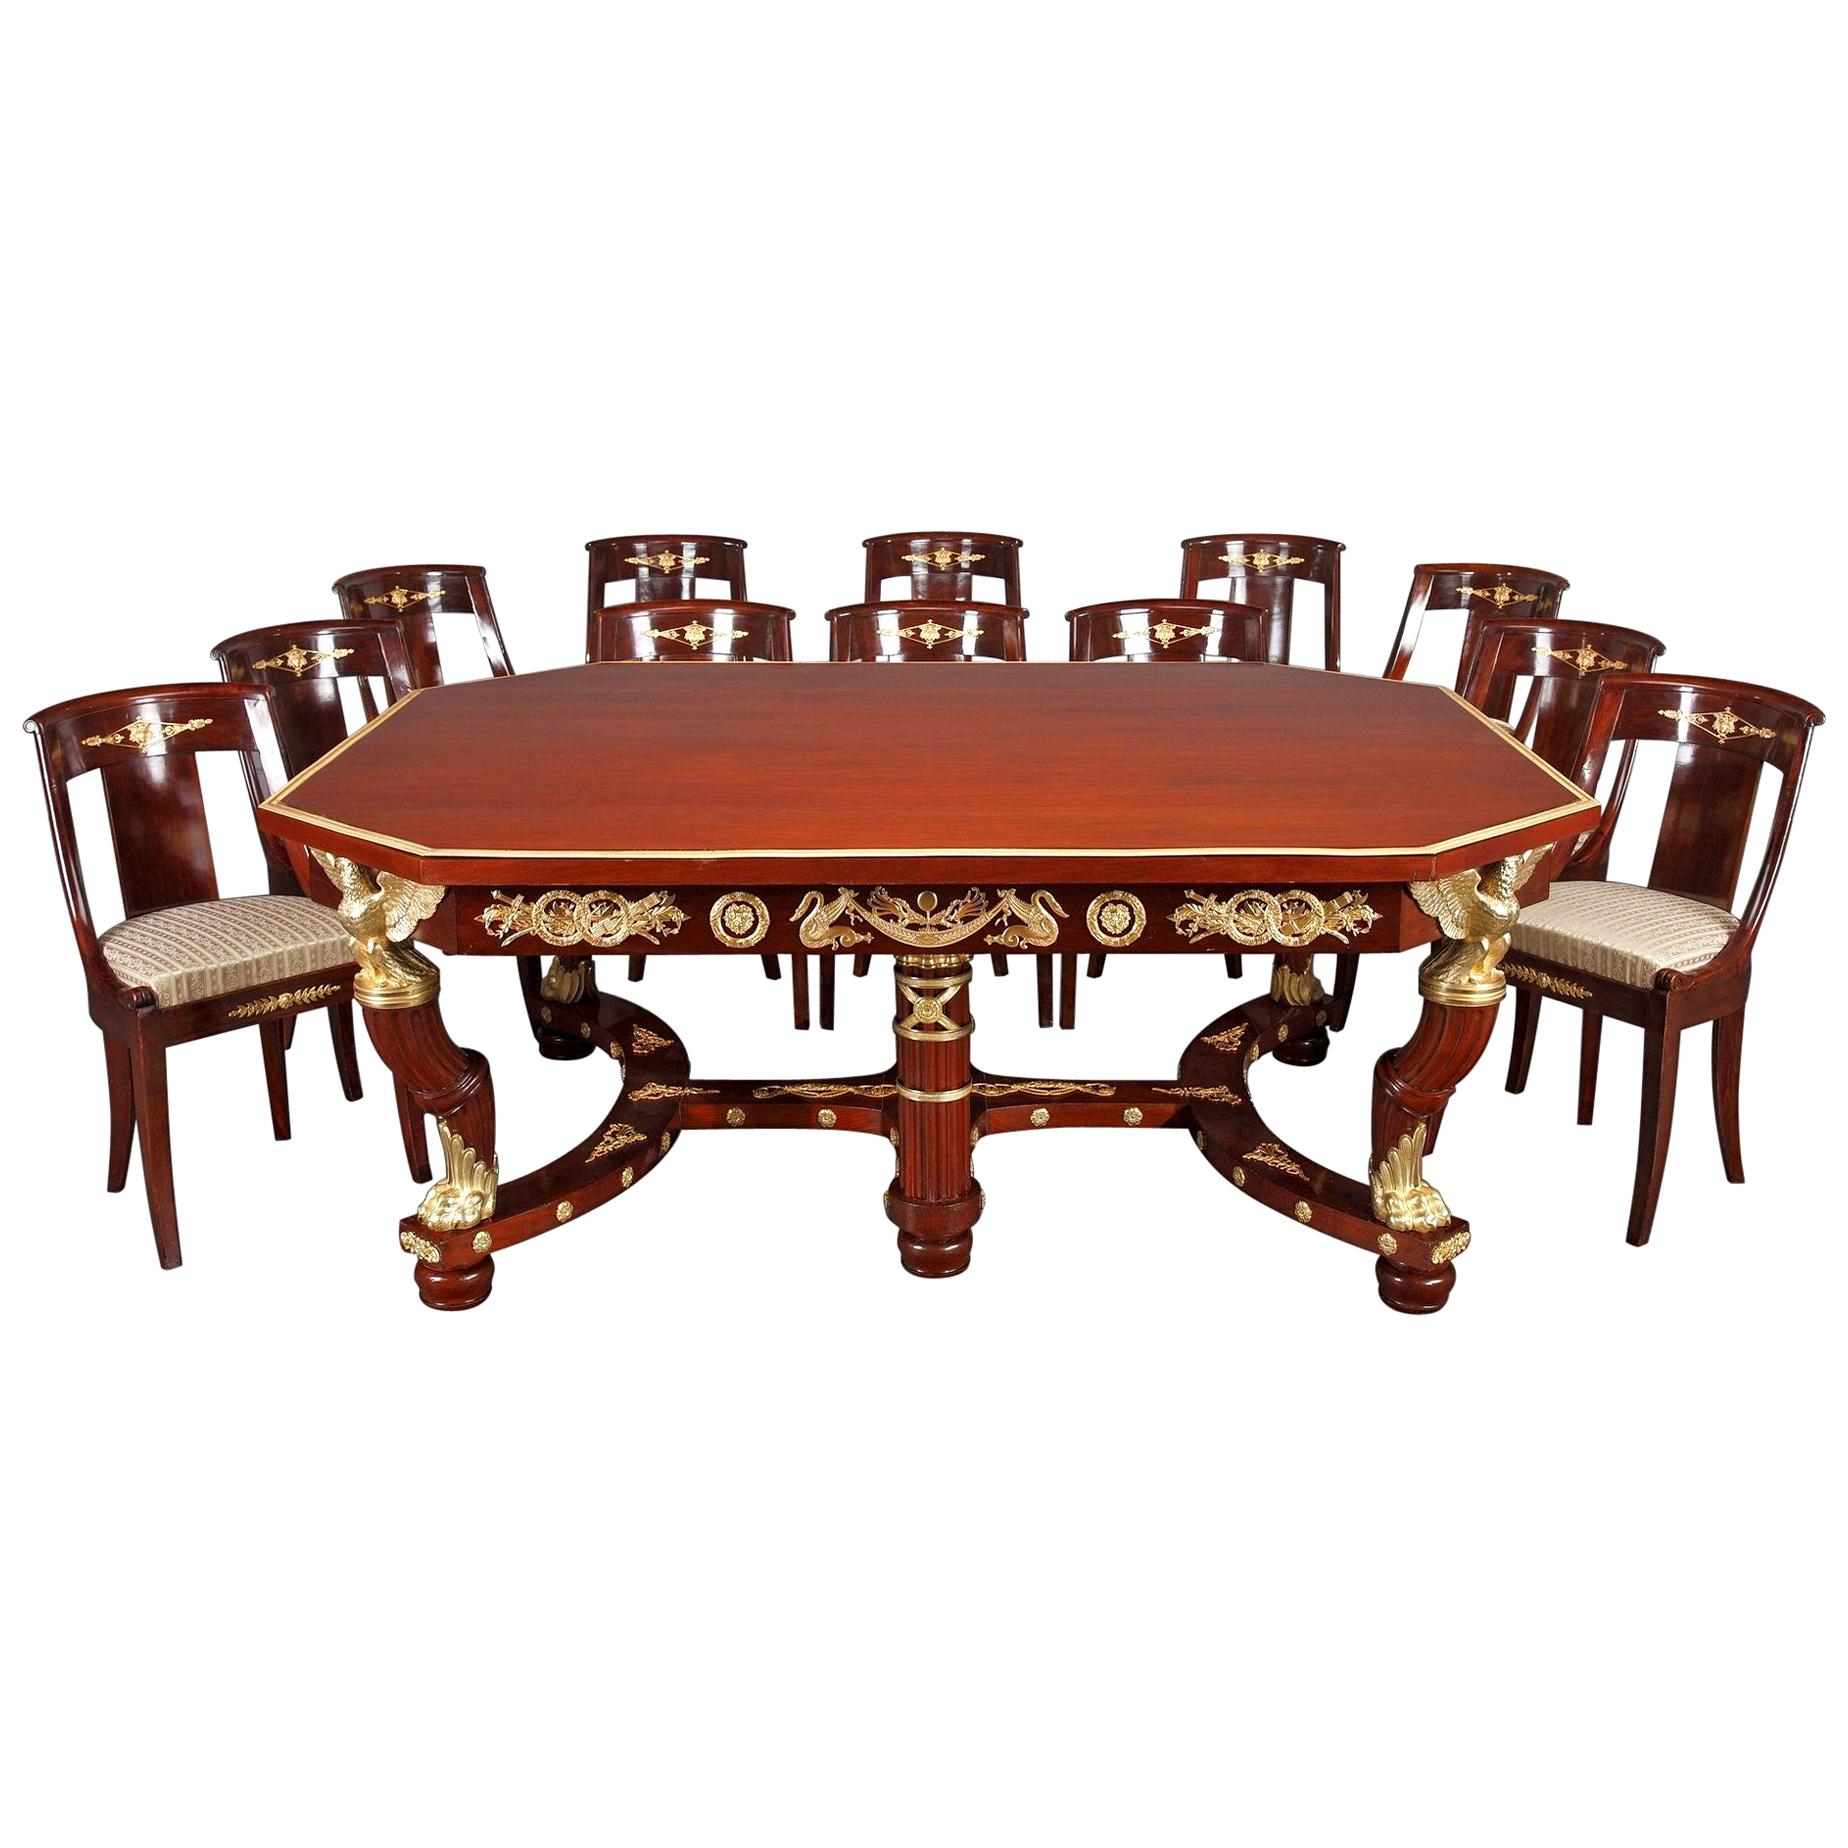 19th Century Mahogany and Gilt Bronze Dining Room Suite in Empire Style